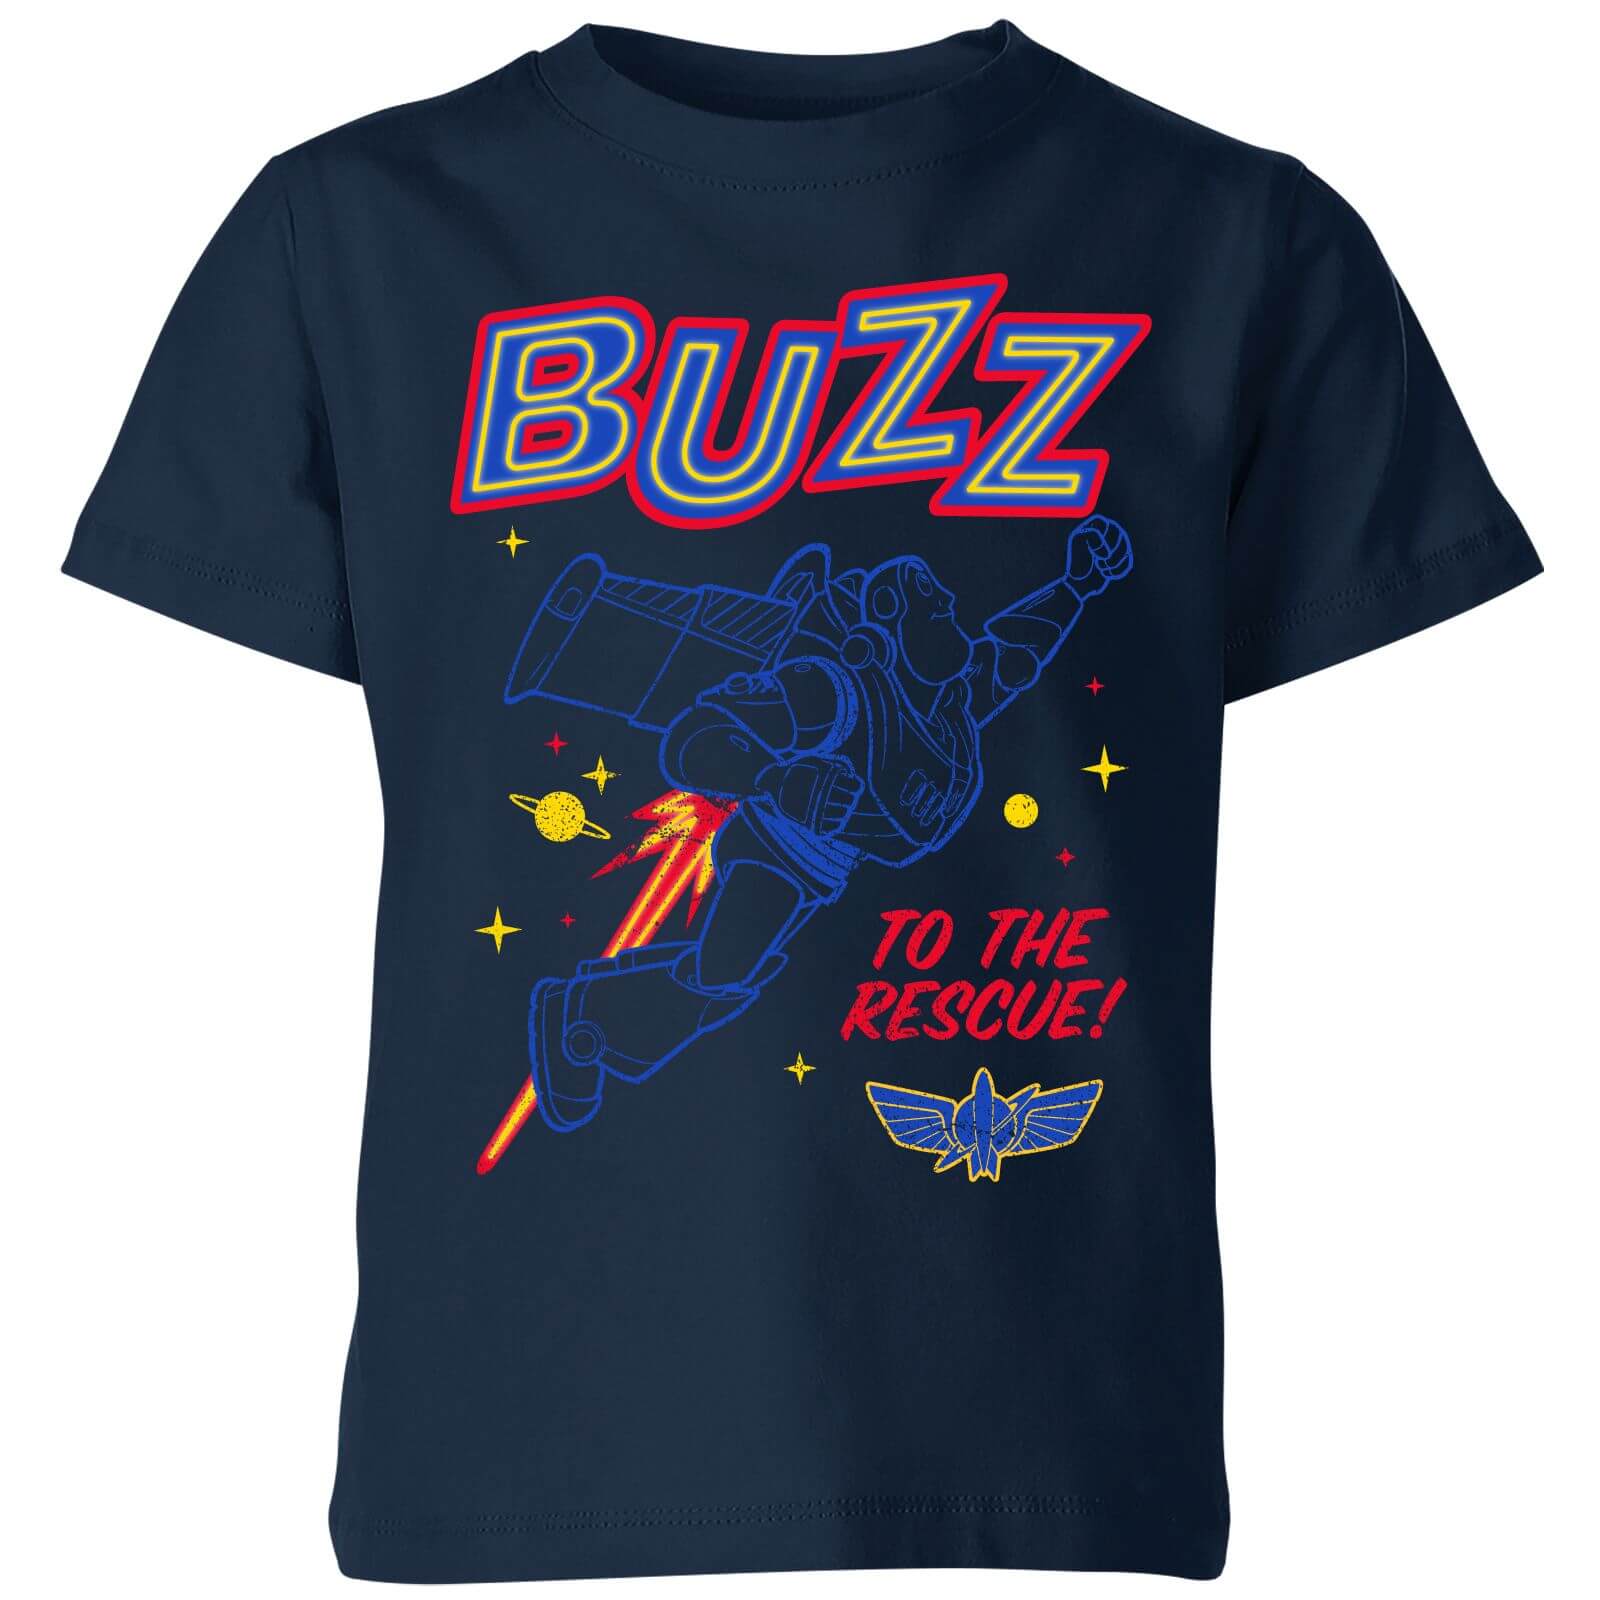 Toy Story 4 Buzz To The Rescue Kids' T-Shirt - Navy - 3-4 Years